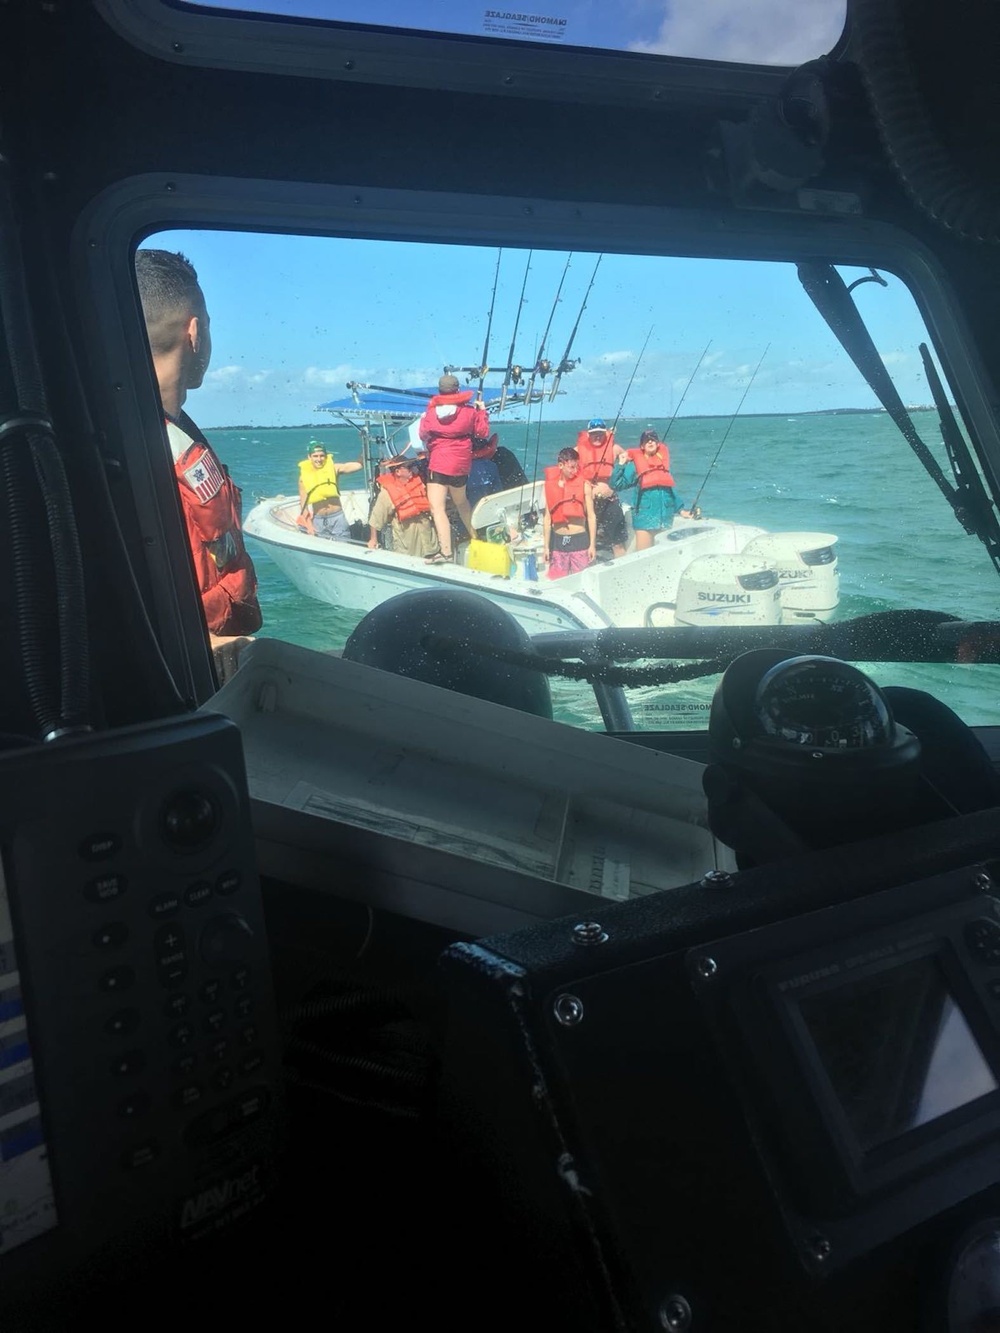 Coast Guard rescues, assists 10 from vessel taking on water south of Islamorada